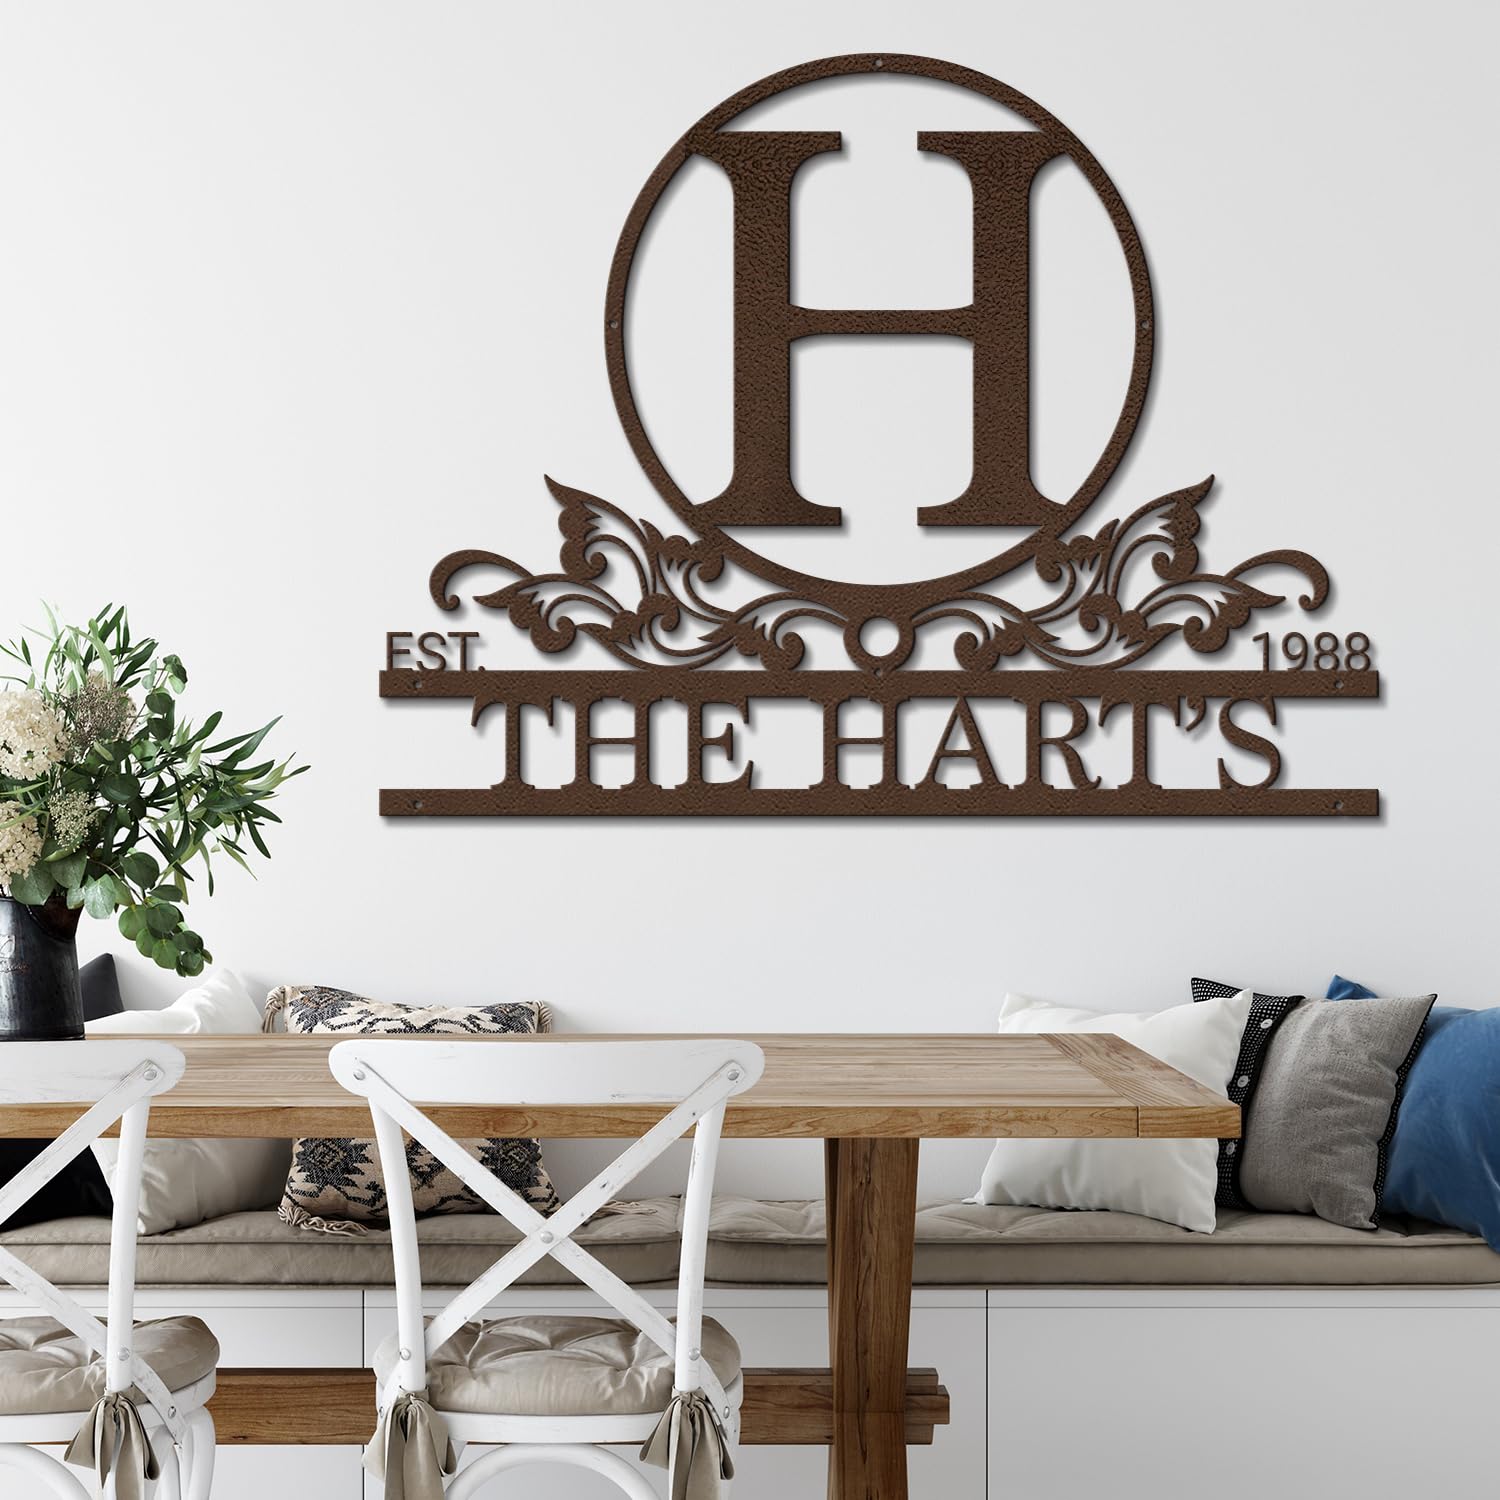 Personalized Metal Signs Family Name Sign Metal Wall Art Split Letter Monogram Outdoor Decor Cabin Sign